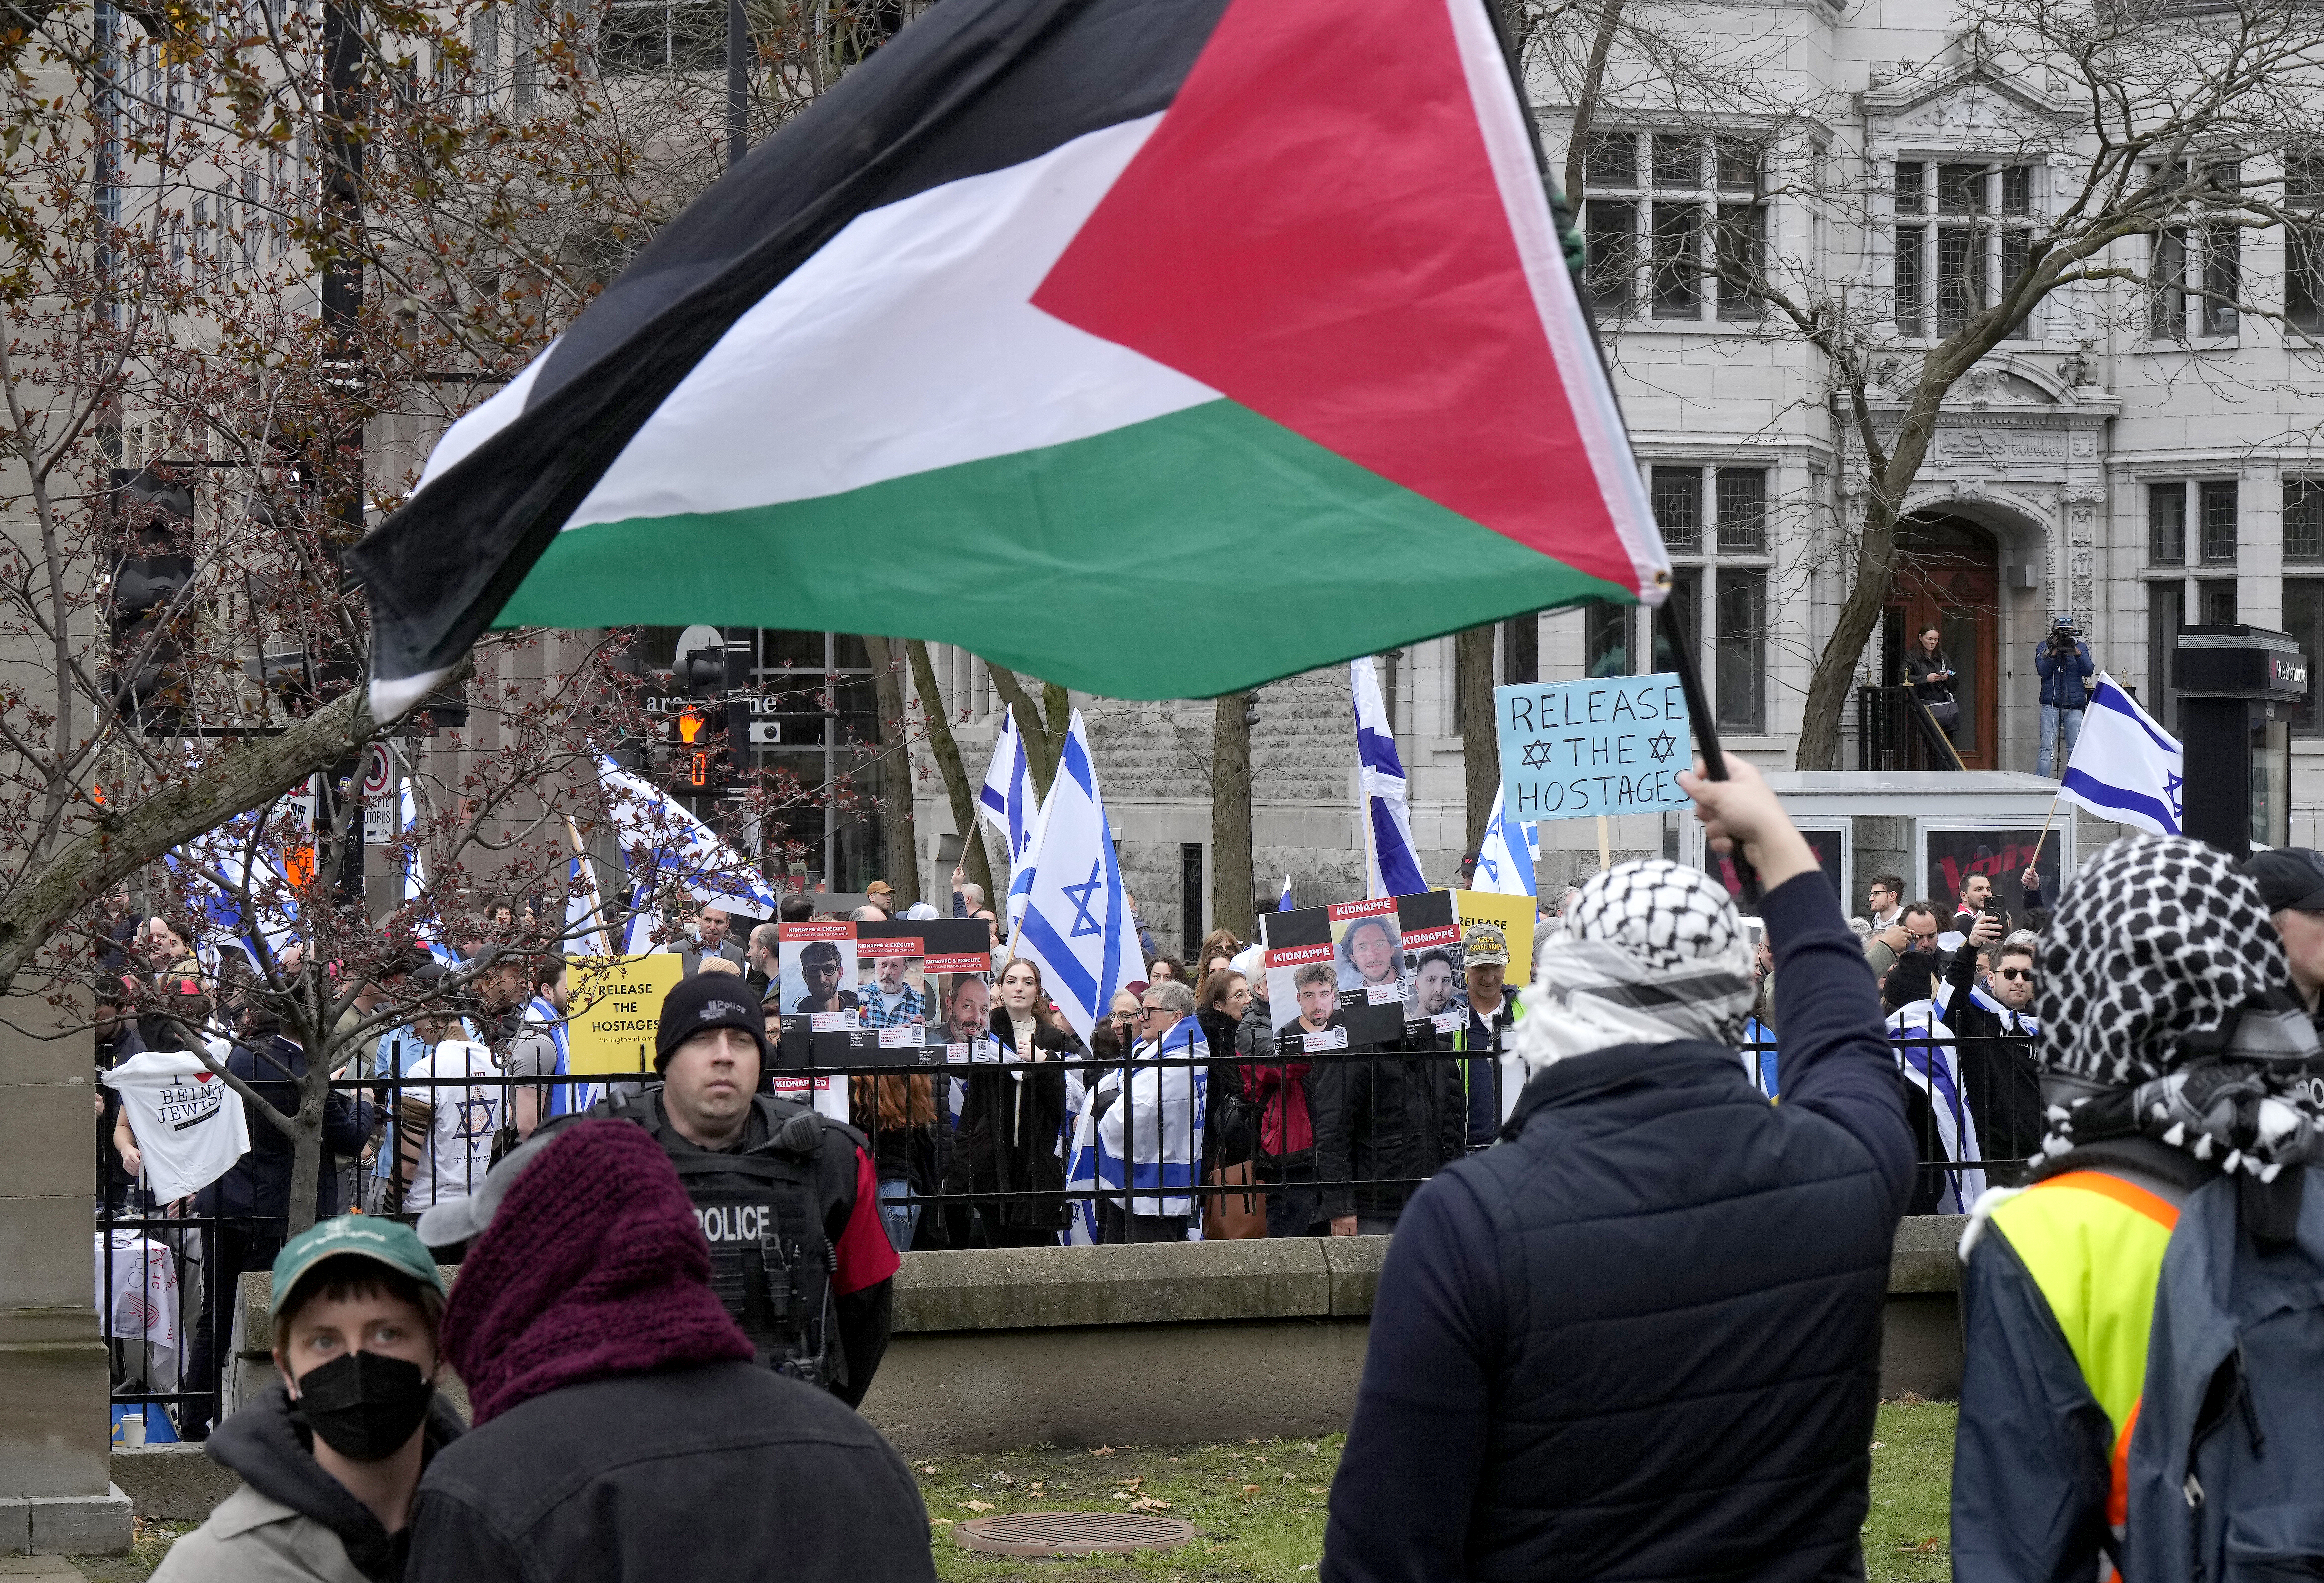 Pro-Palestinian encampment stretches into 7th day at McGill